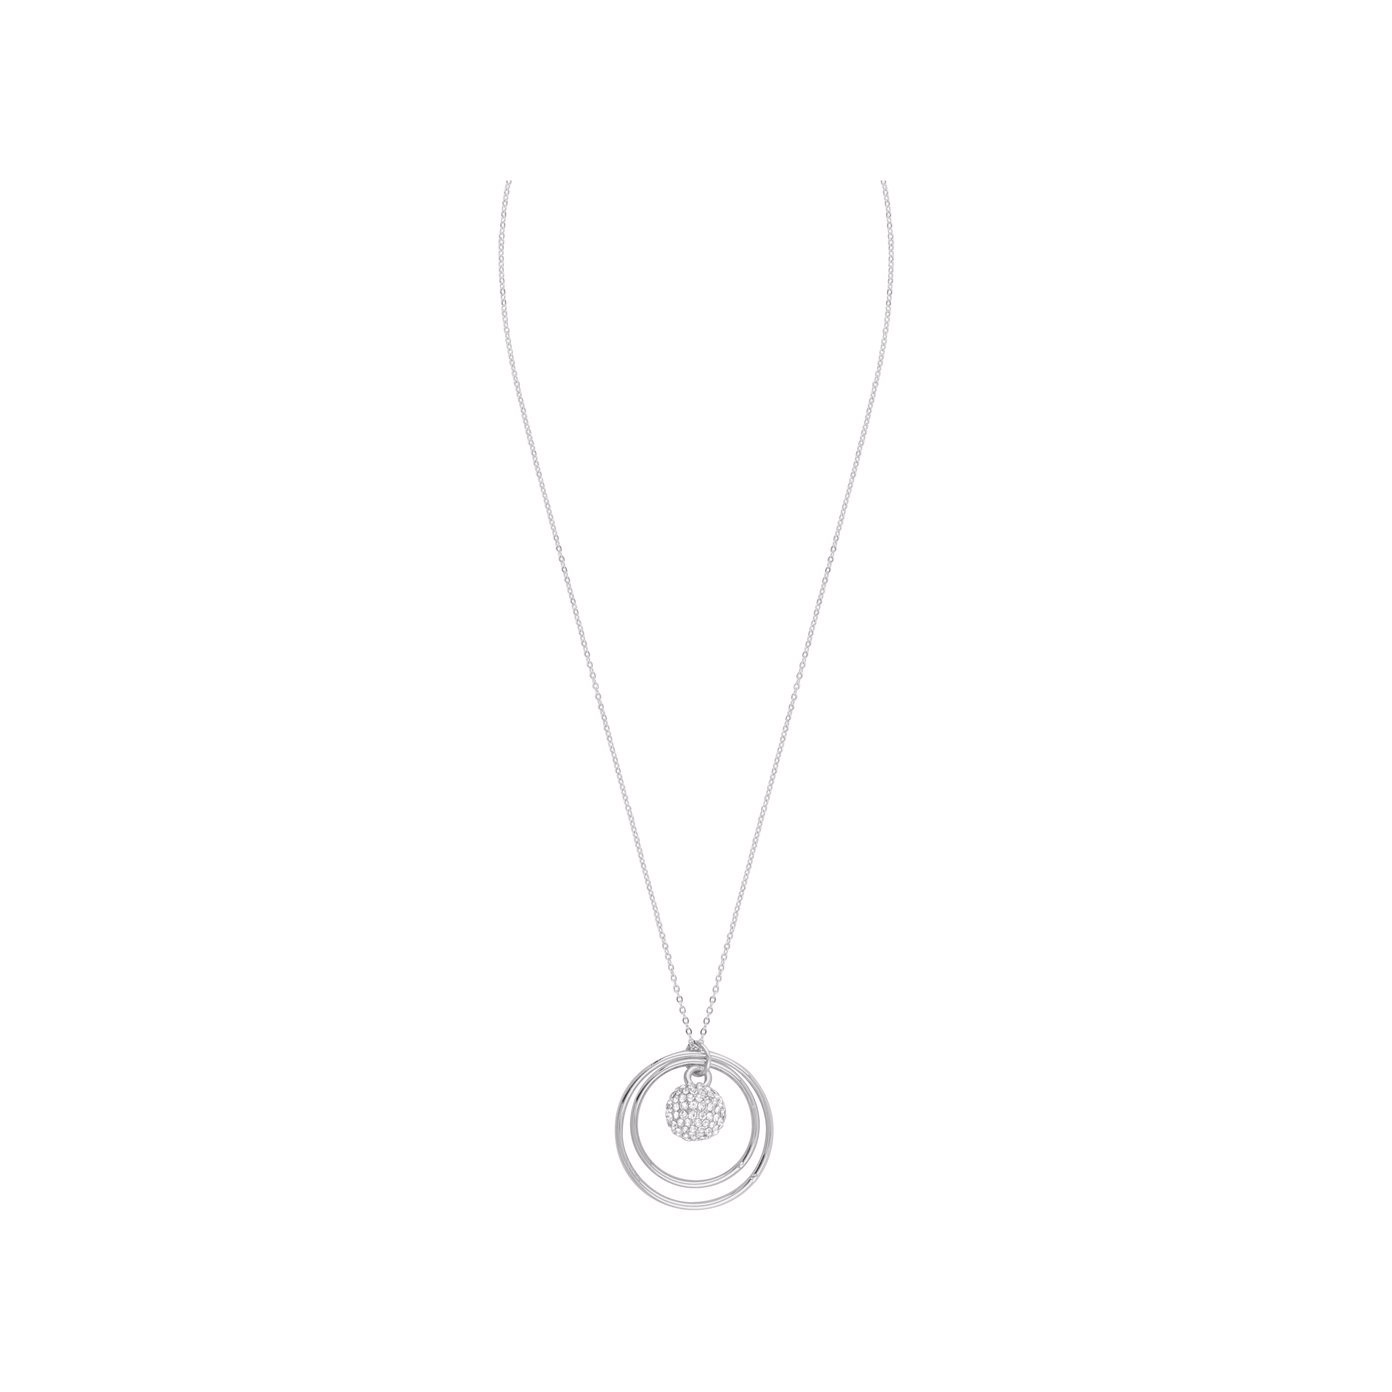 Pendant necklace Engraved Sterling Silver OEM/ODM Jewelry OEM jewelry manufacturer